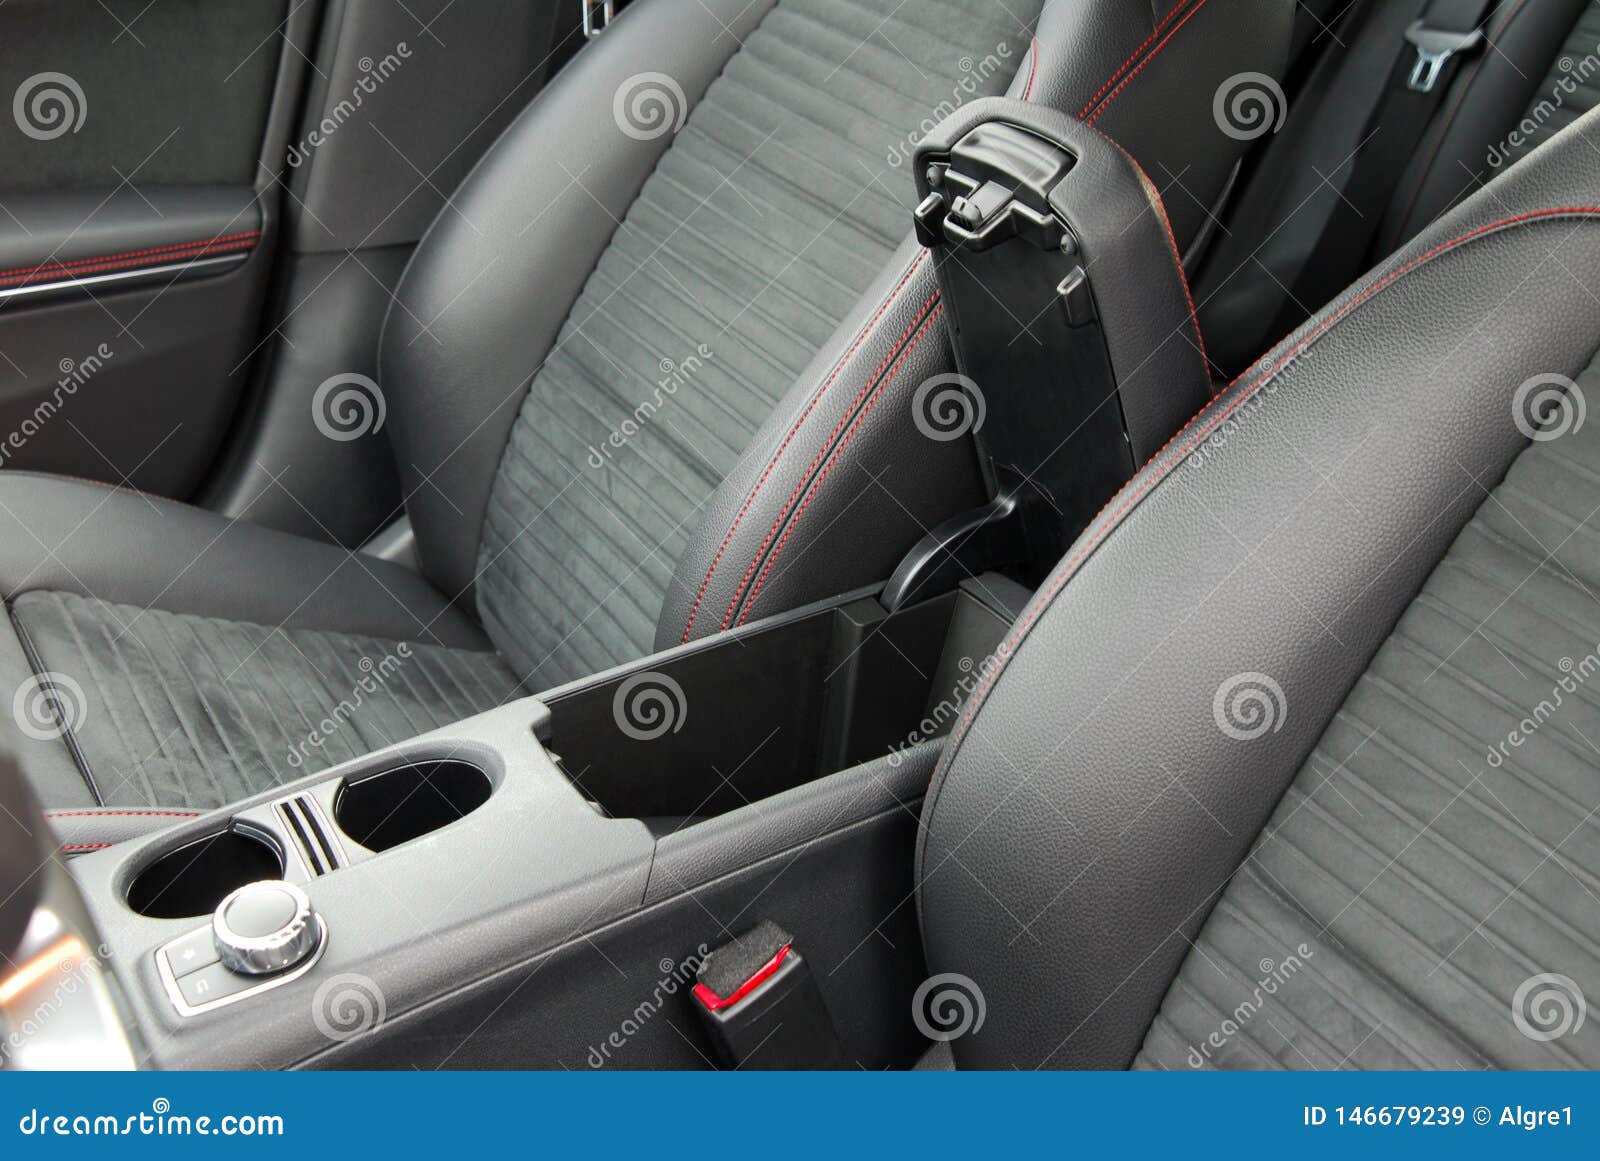 Open Storage Box between Front Car Seats Stock Image - Image of